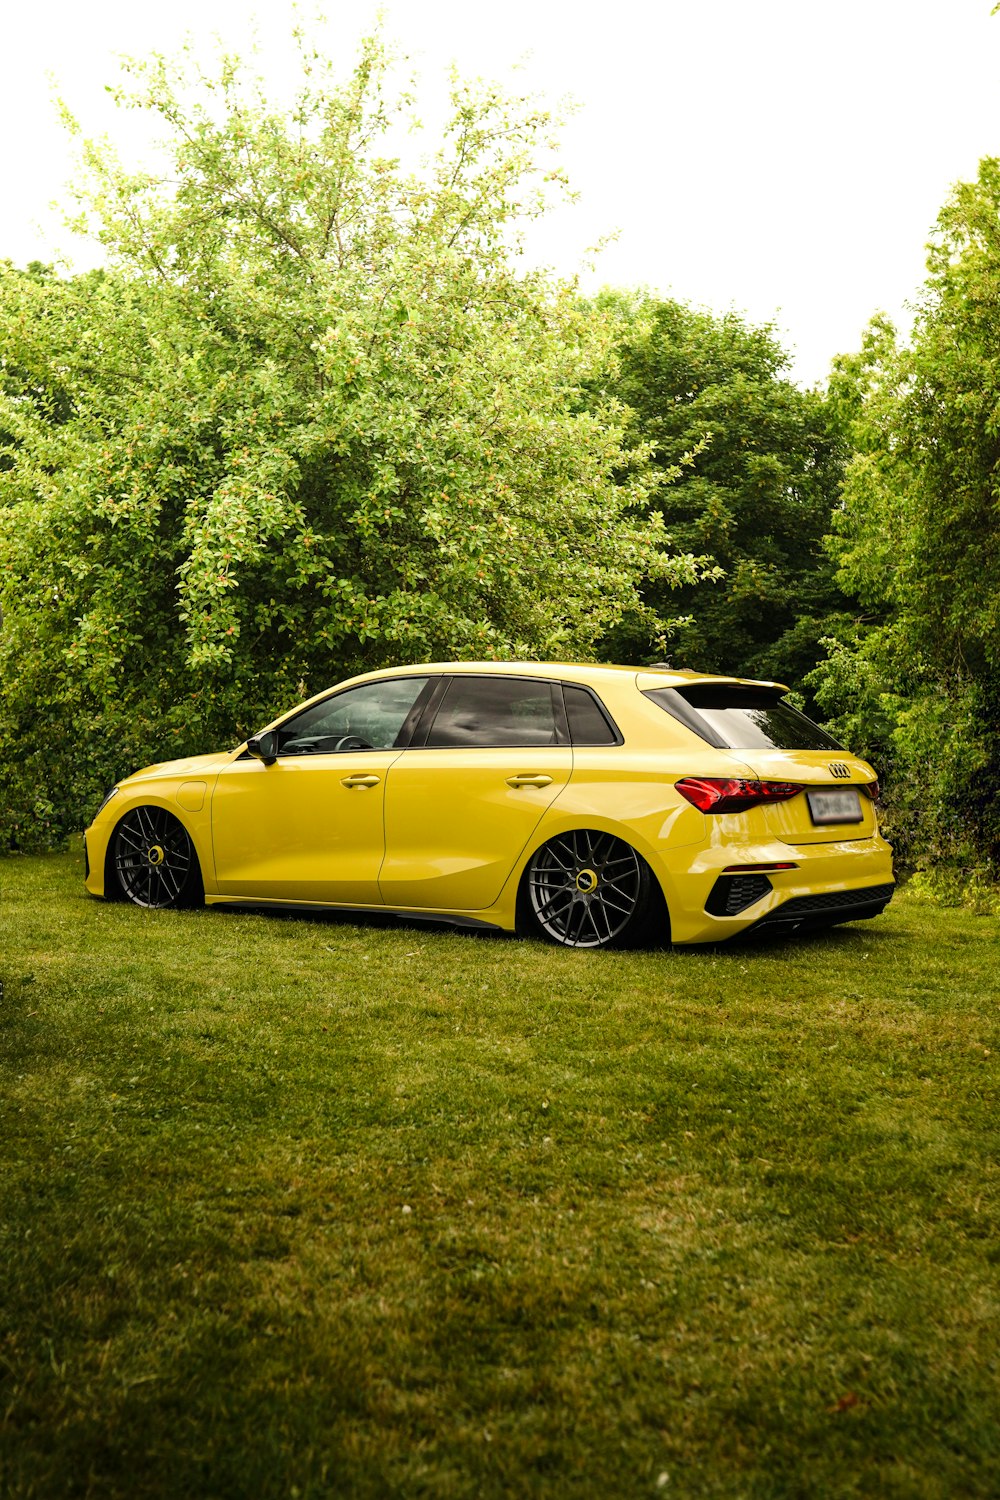 a yellow car parked in a grassy area with trees in the background